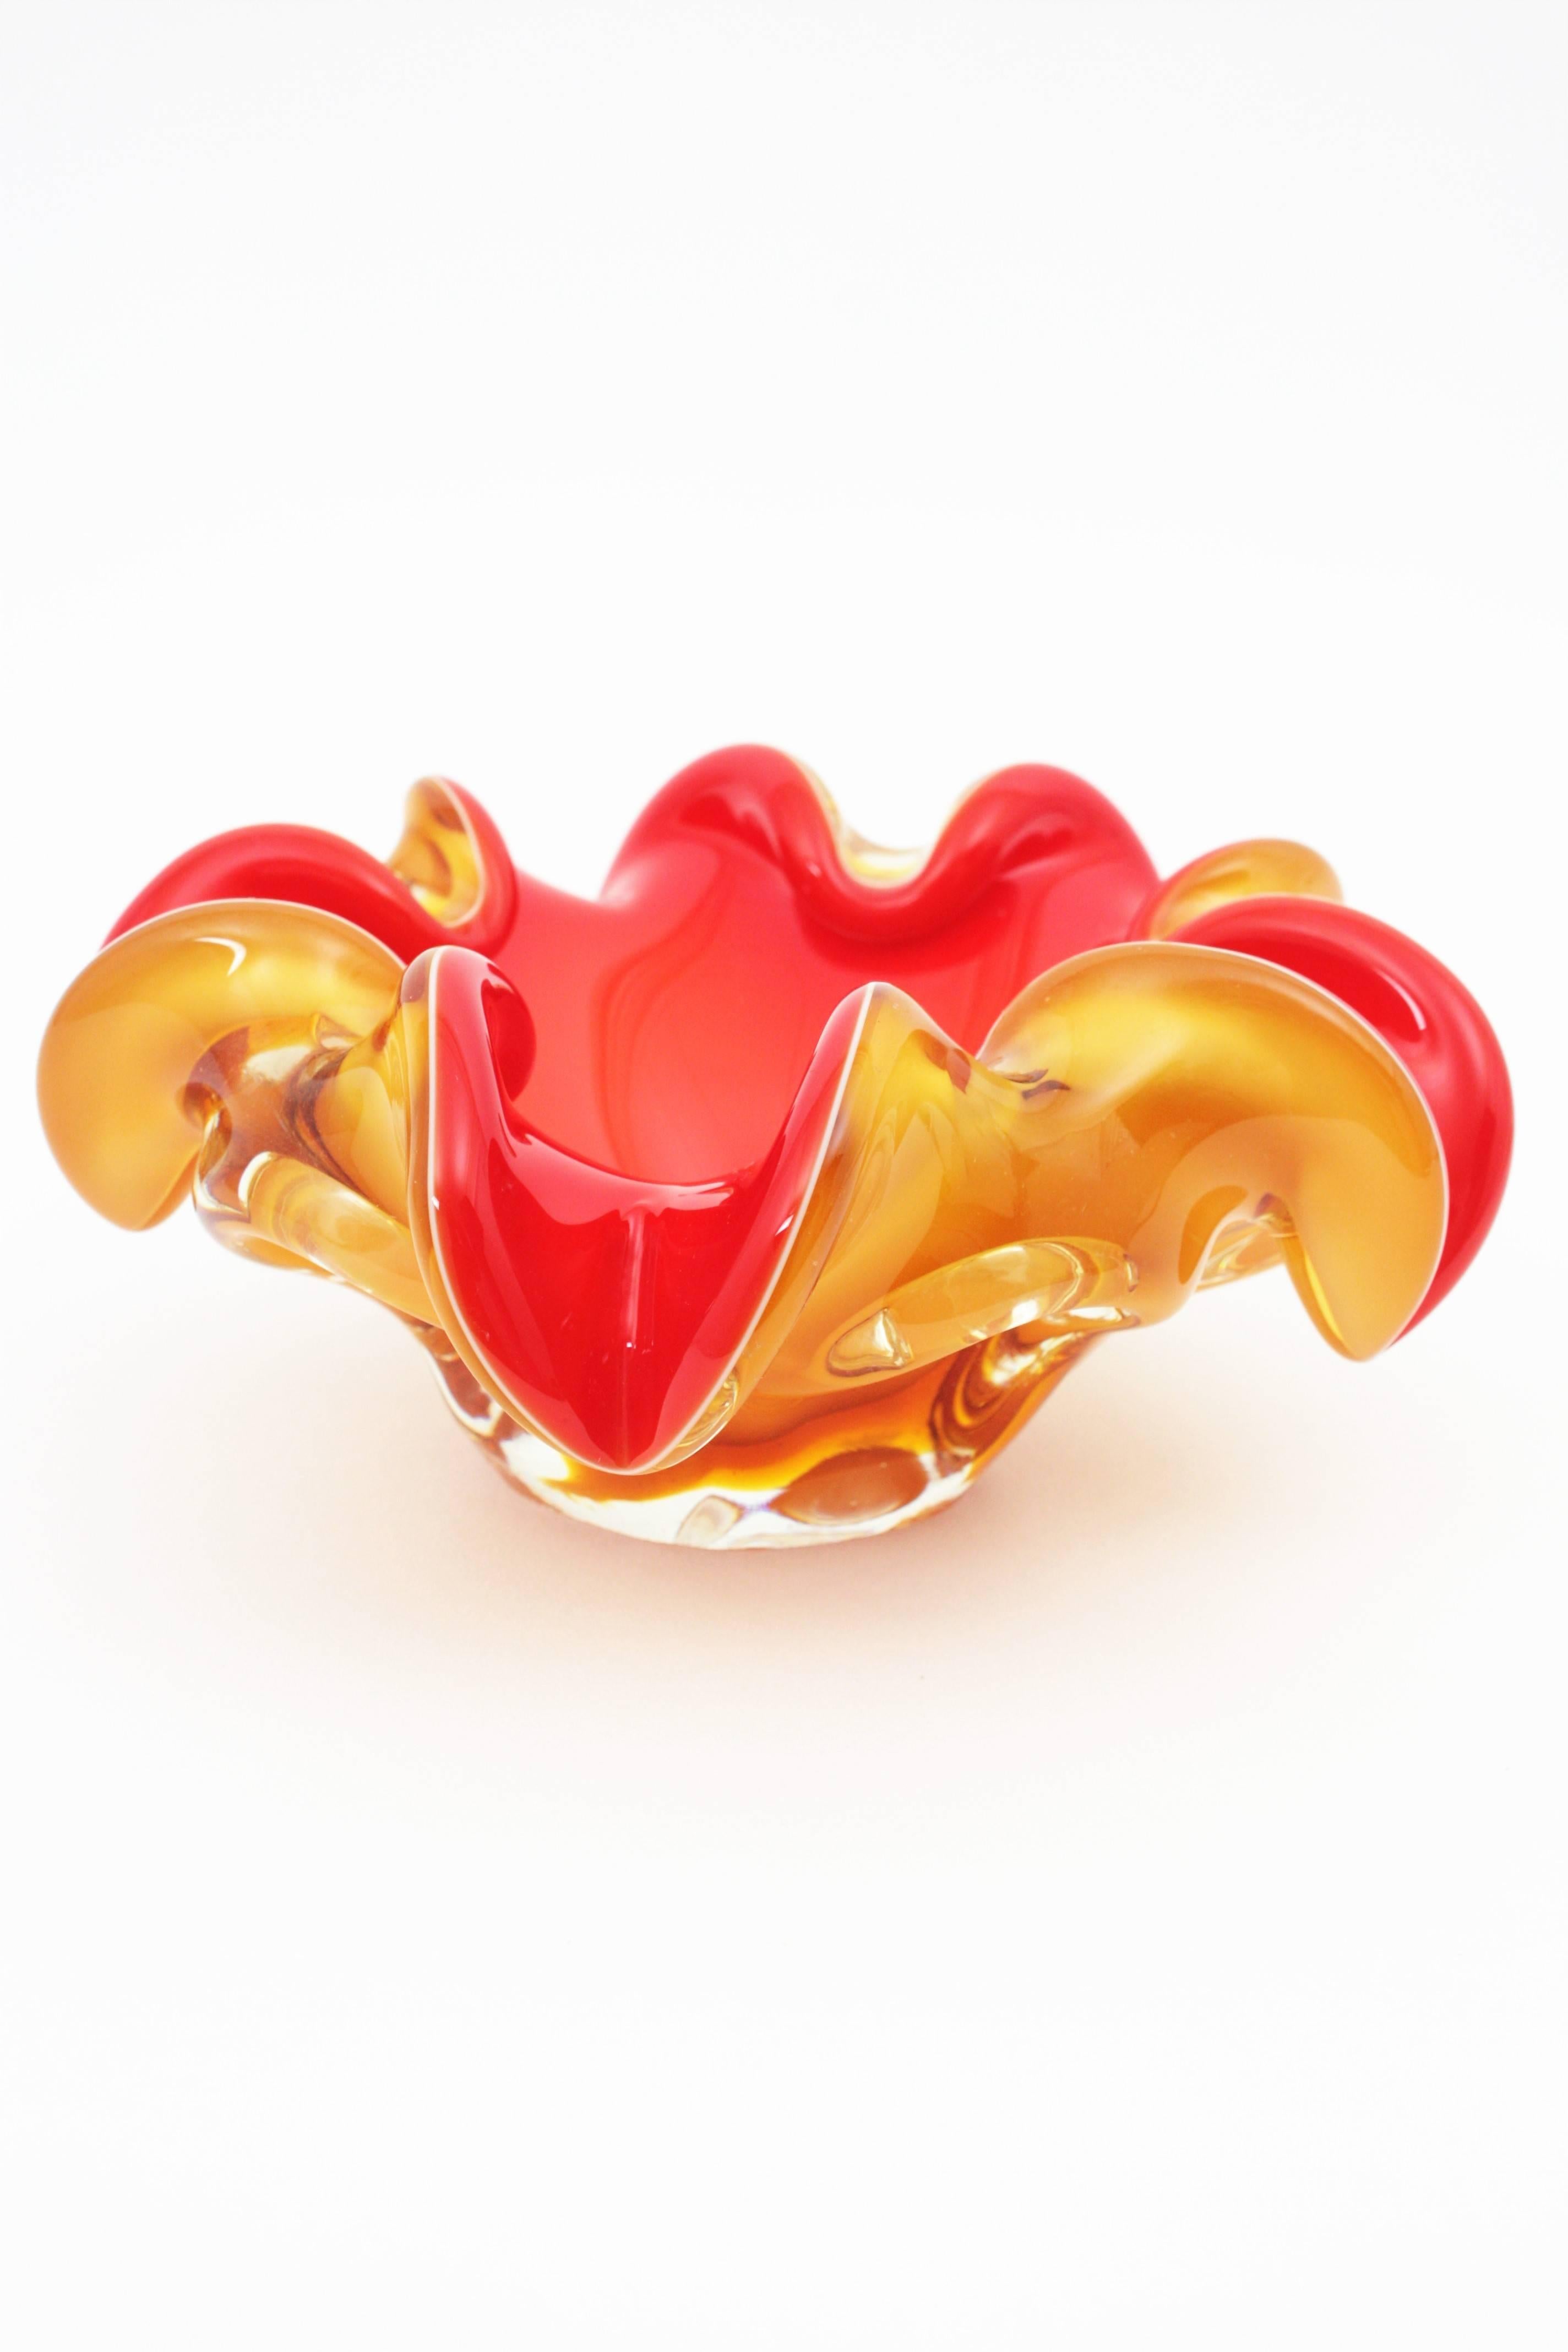 Red and Amber Sommerso Murano Glass Art Flower Bowl 2